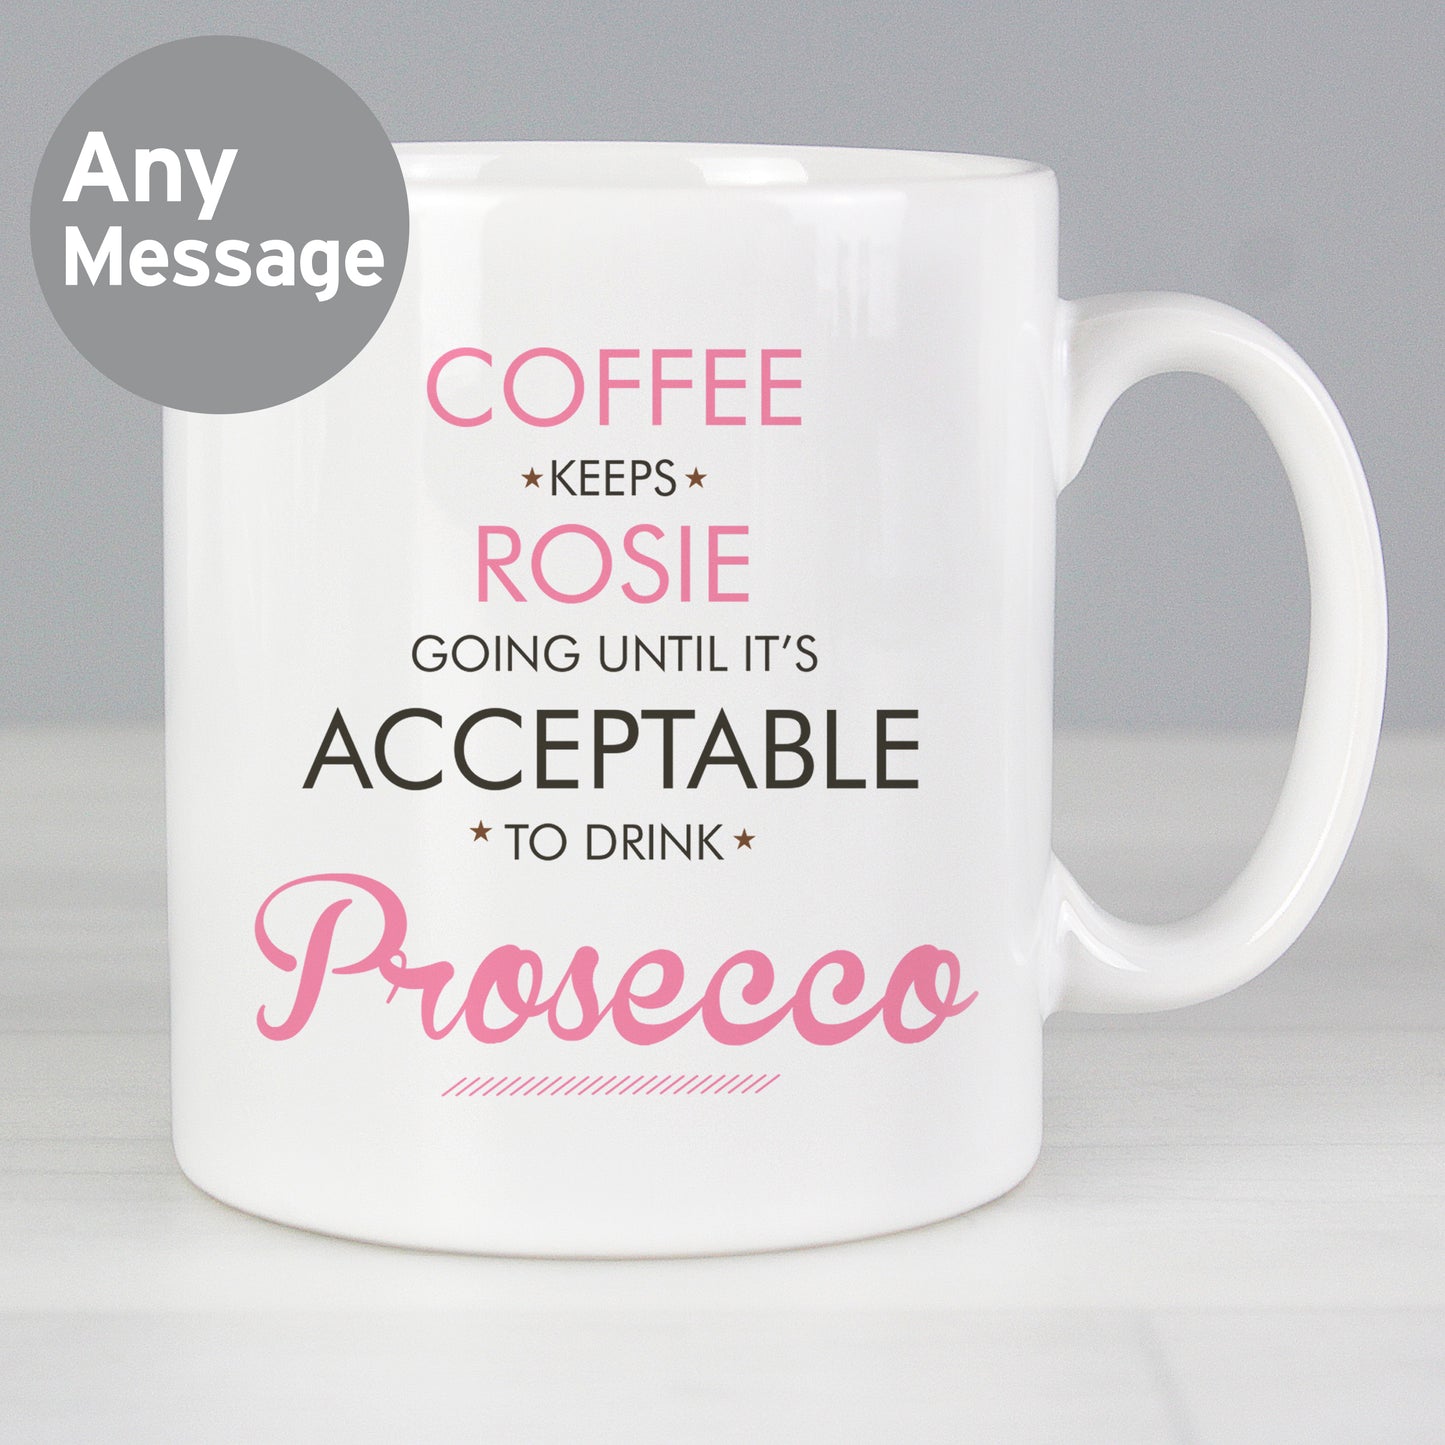 Personalised Acceptable to Drink Mug - Personalise It!